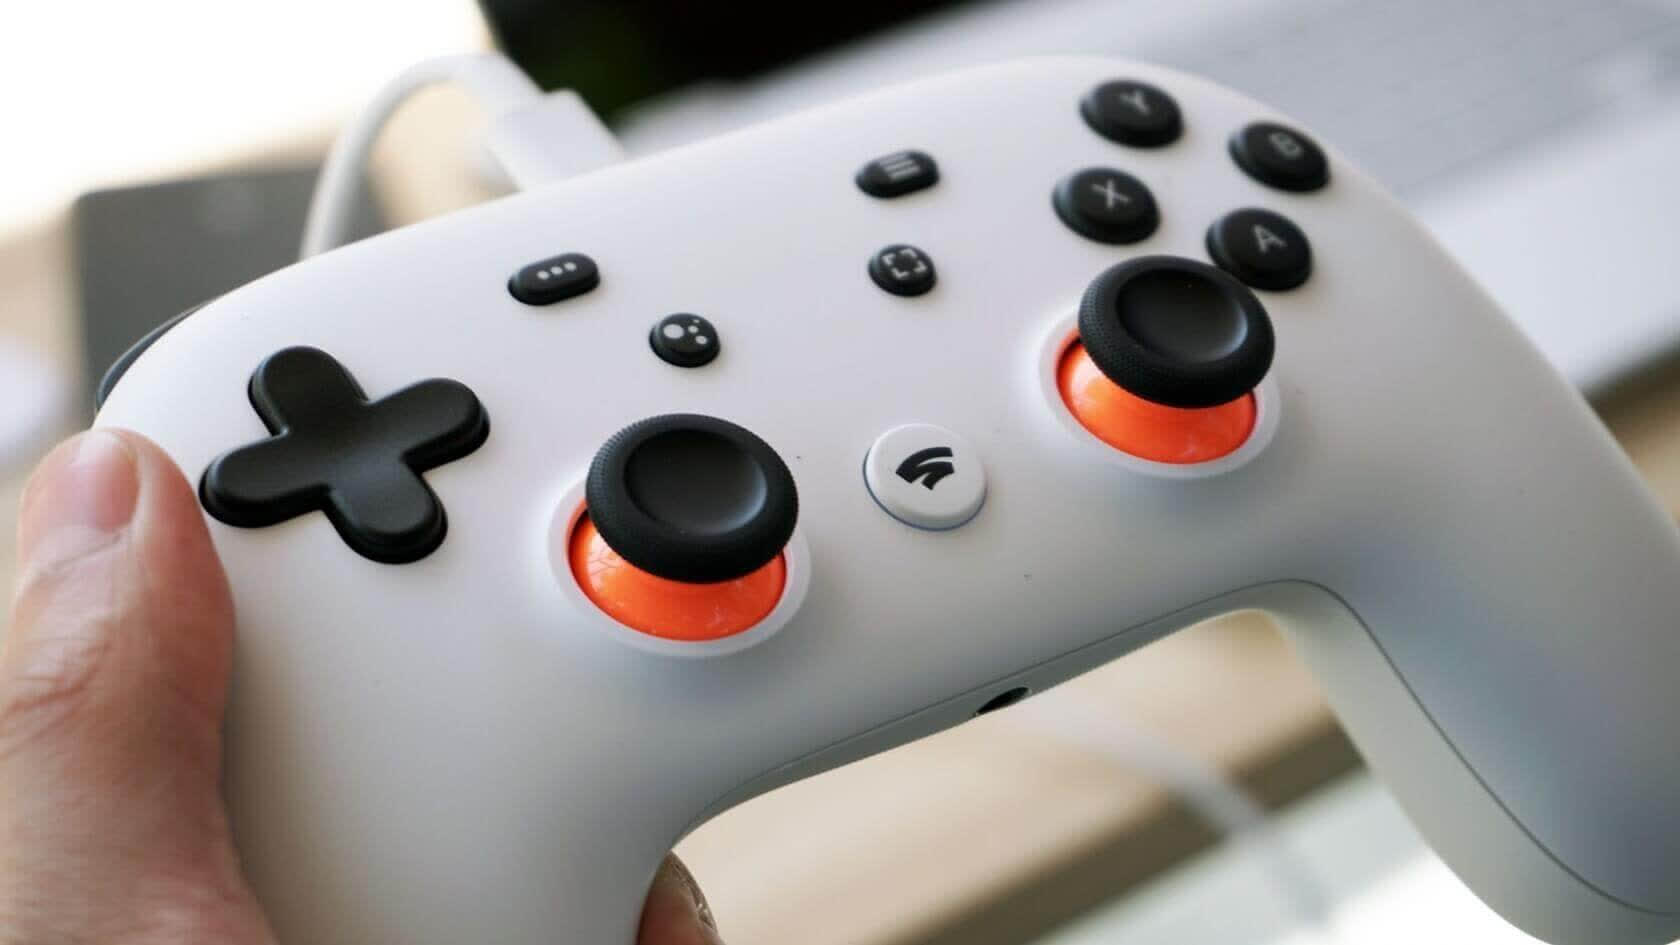 Google: Stadia is alive and well, though evidence suggests otherwise